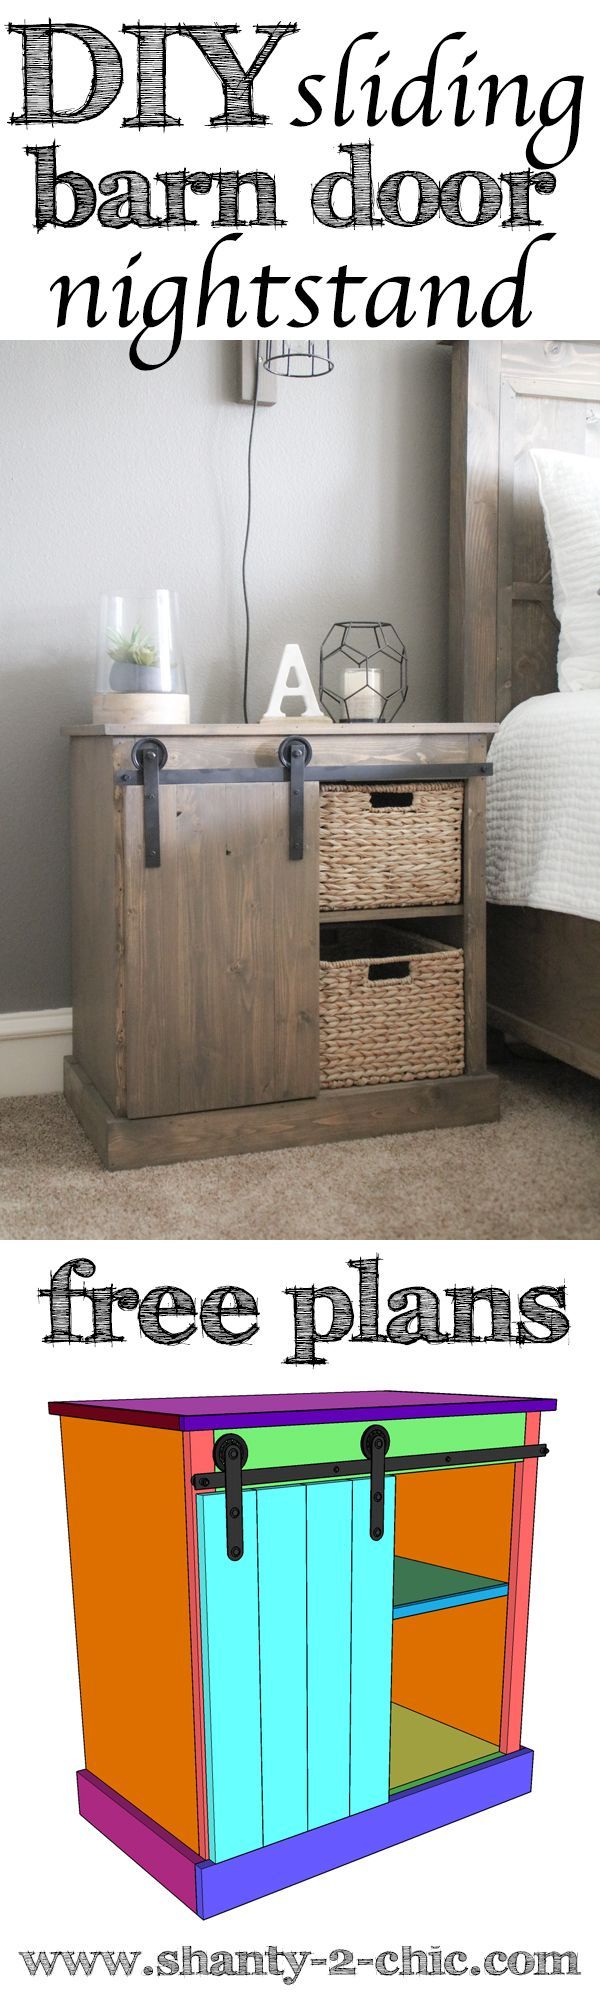 DIY Sliding Barn Door Nightstand plans and how-to video! Learn how to build this nightstand and the $20 DIY barn door hardware.